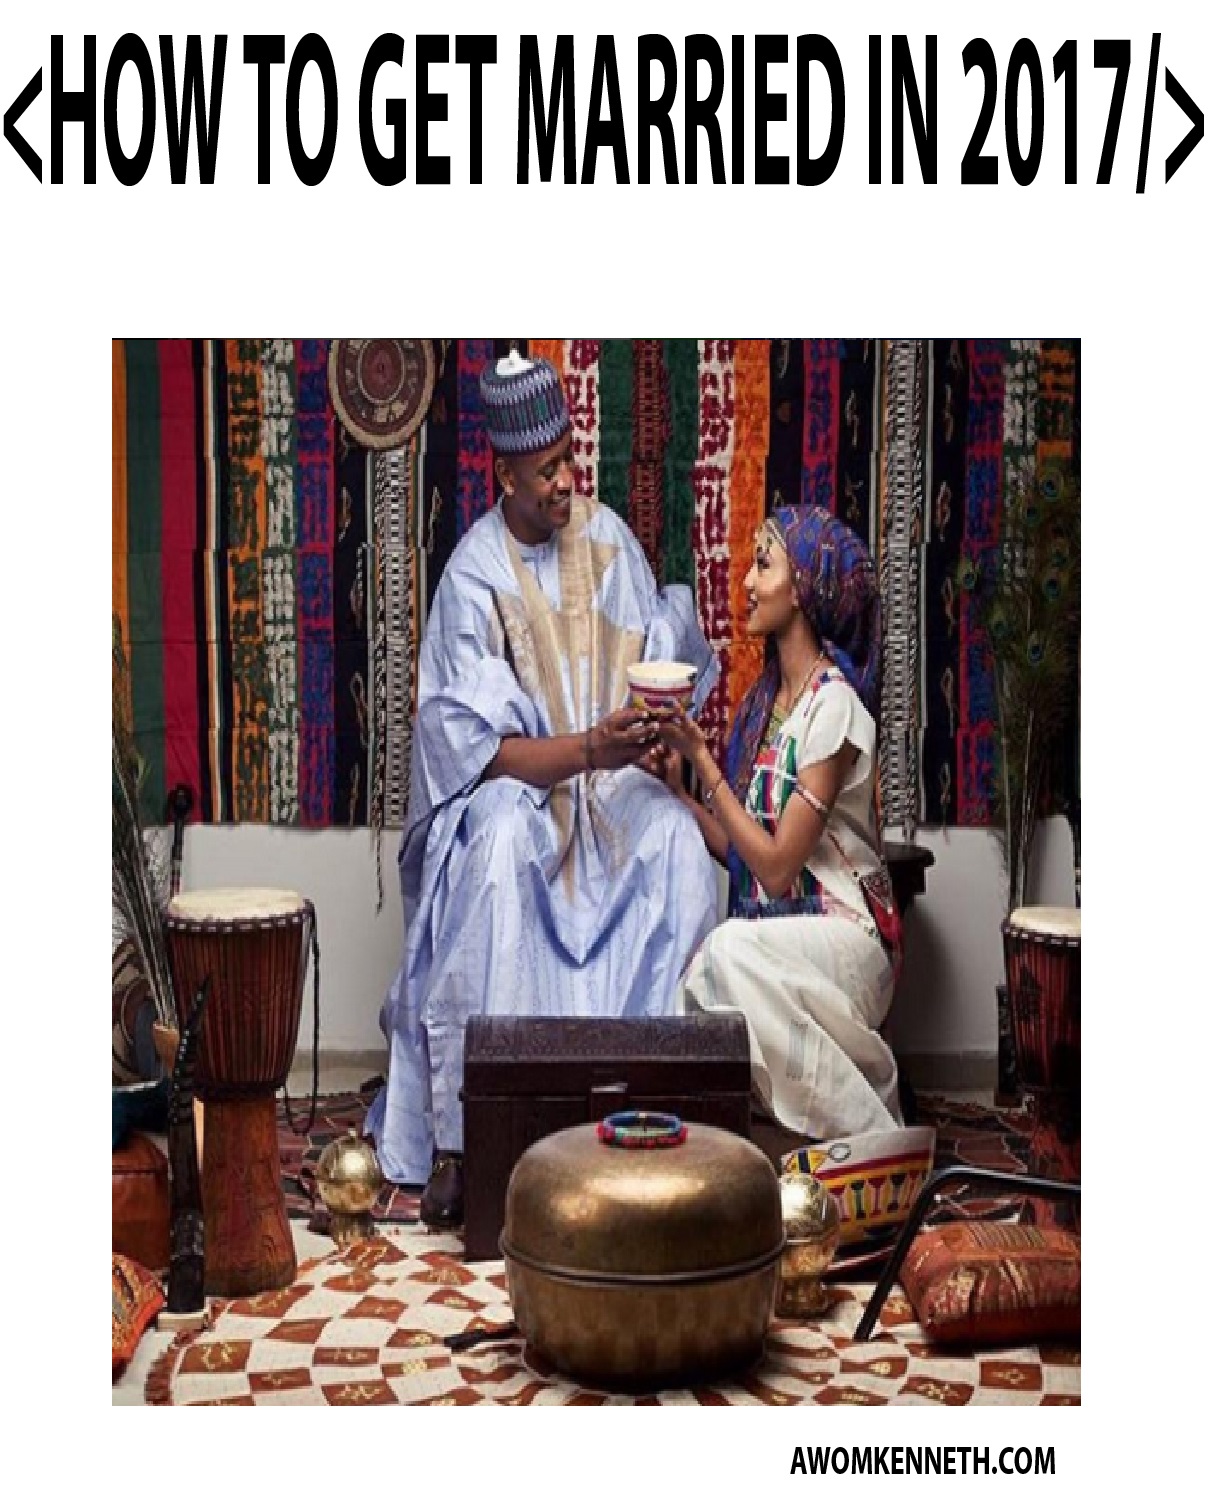 how to get maried in 2017 awomkenneth.com 